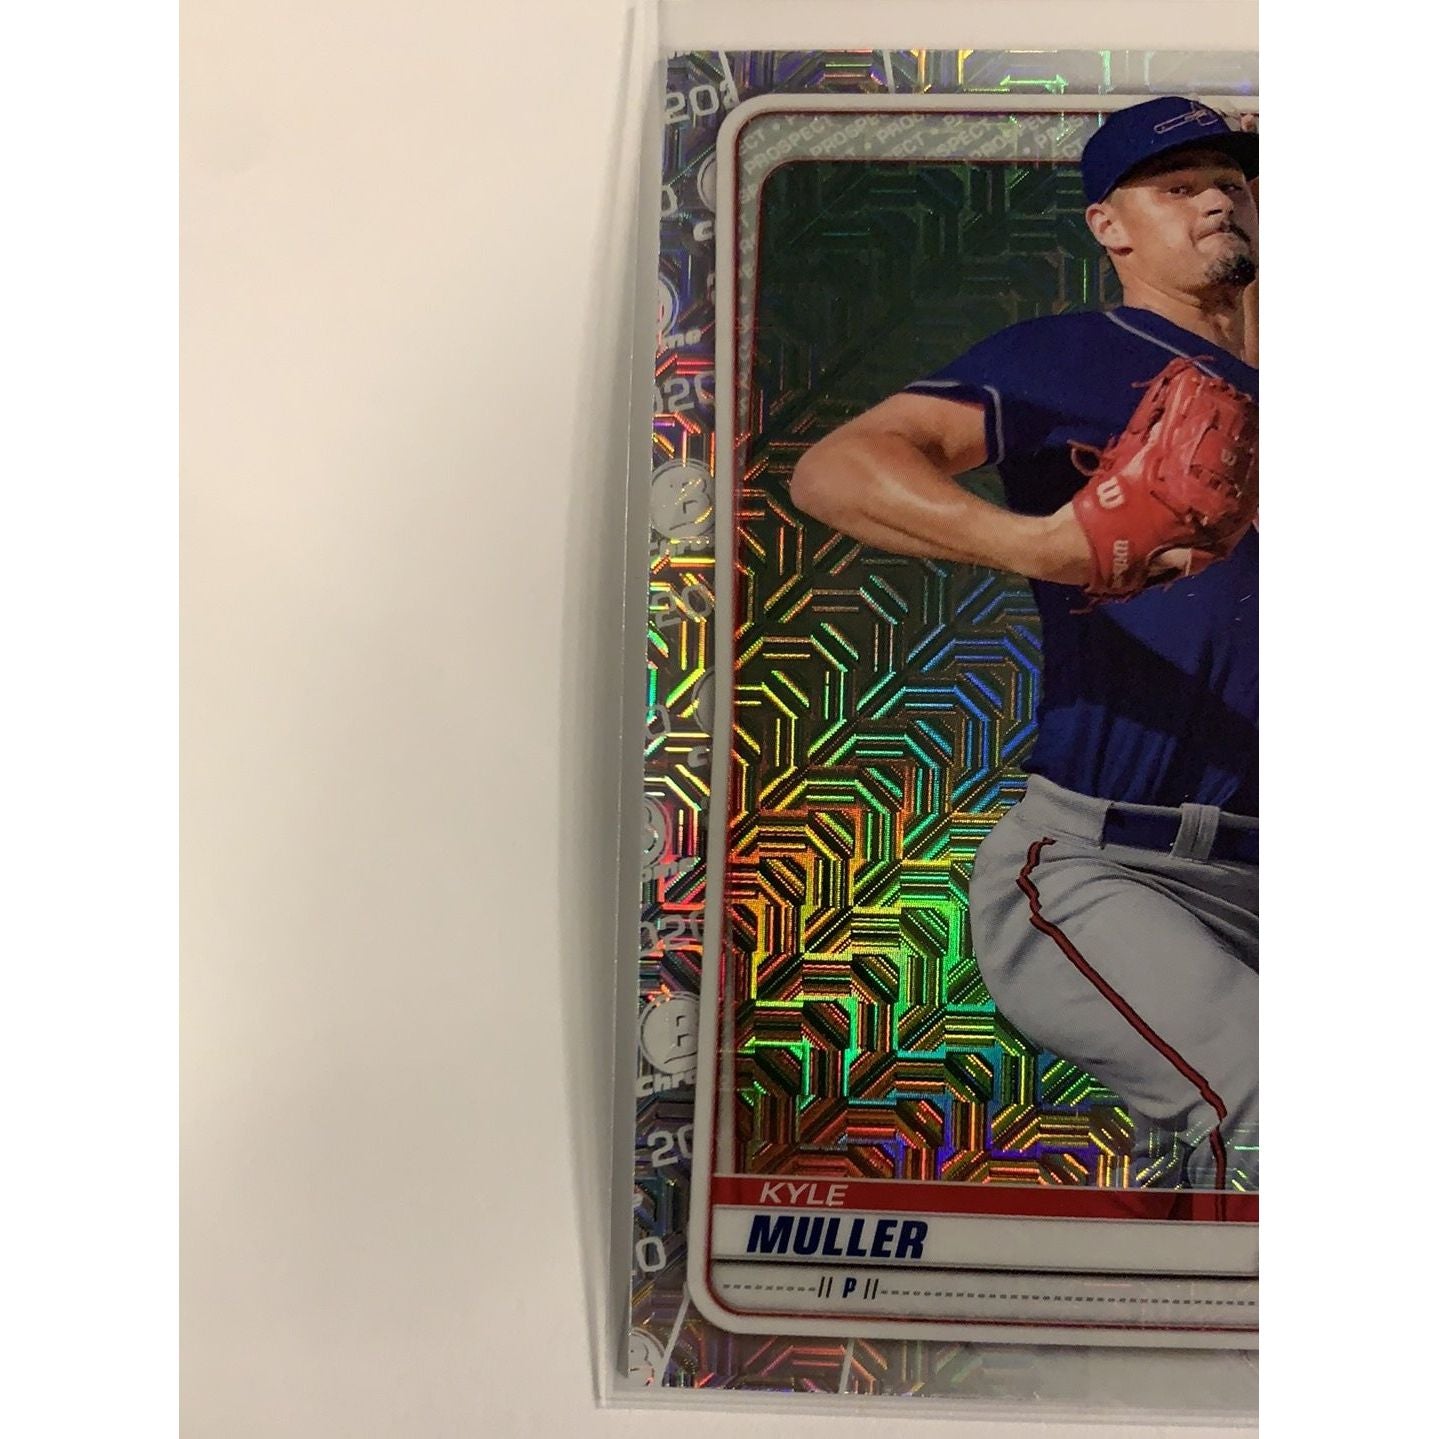  2020 Bowman Chrome Kyle Muller Prospect Mojo Refractor  Local Legends Cards & Collectibles